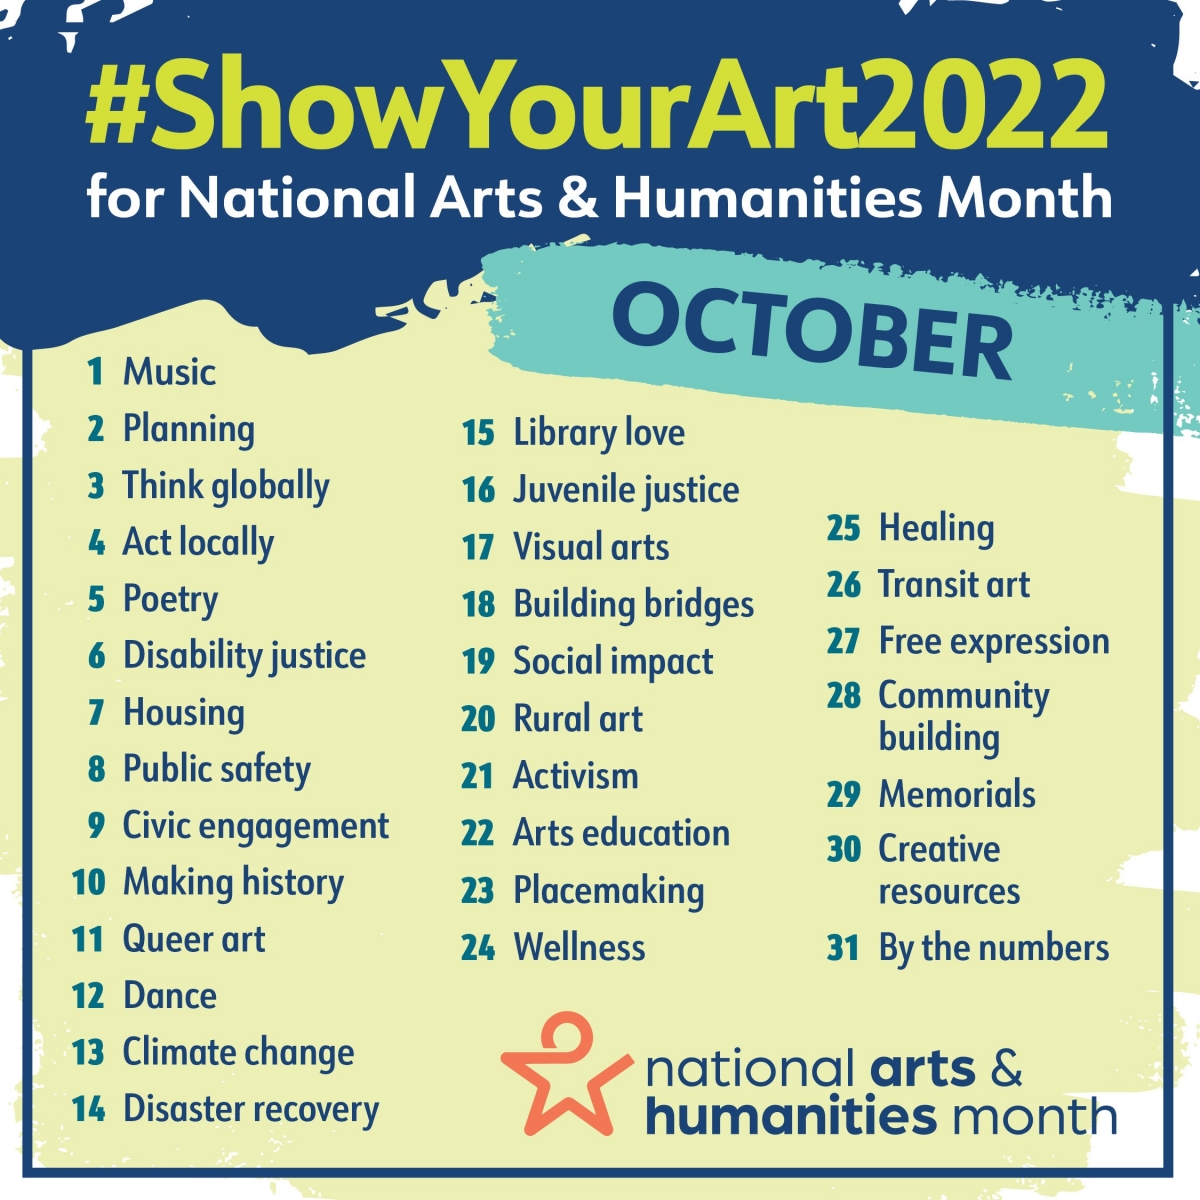 A designed graphic listing the 31 daily themes for Show Your Art 2022 in October.